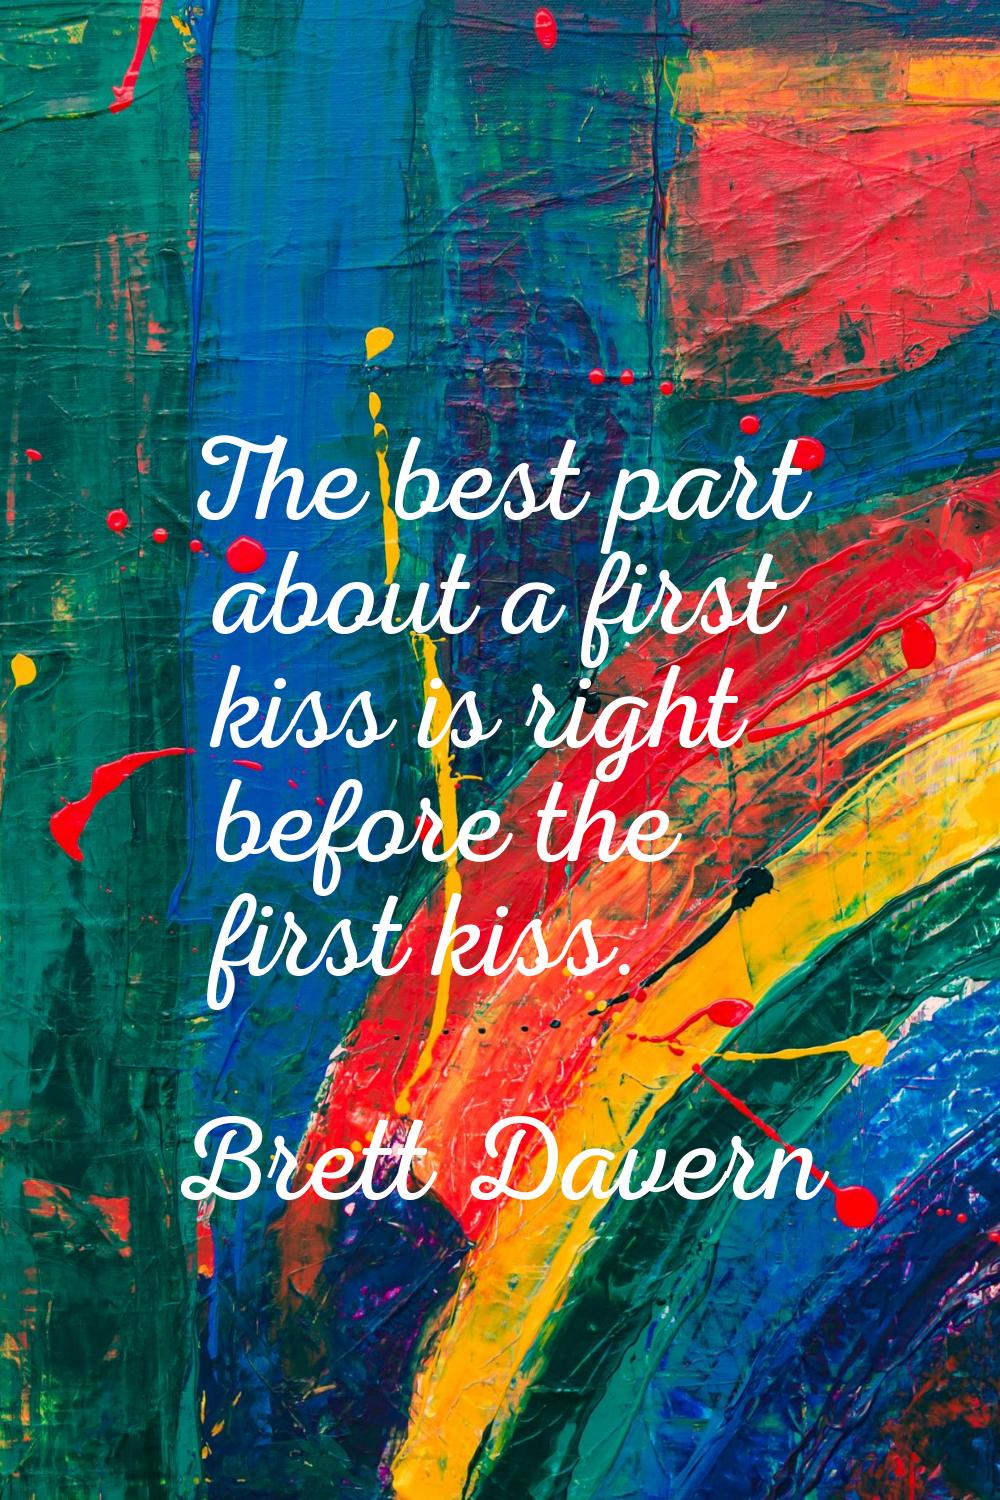 The best part about a first kiss is right before the first kiss.